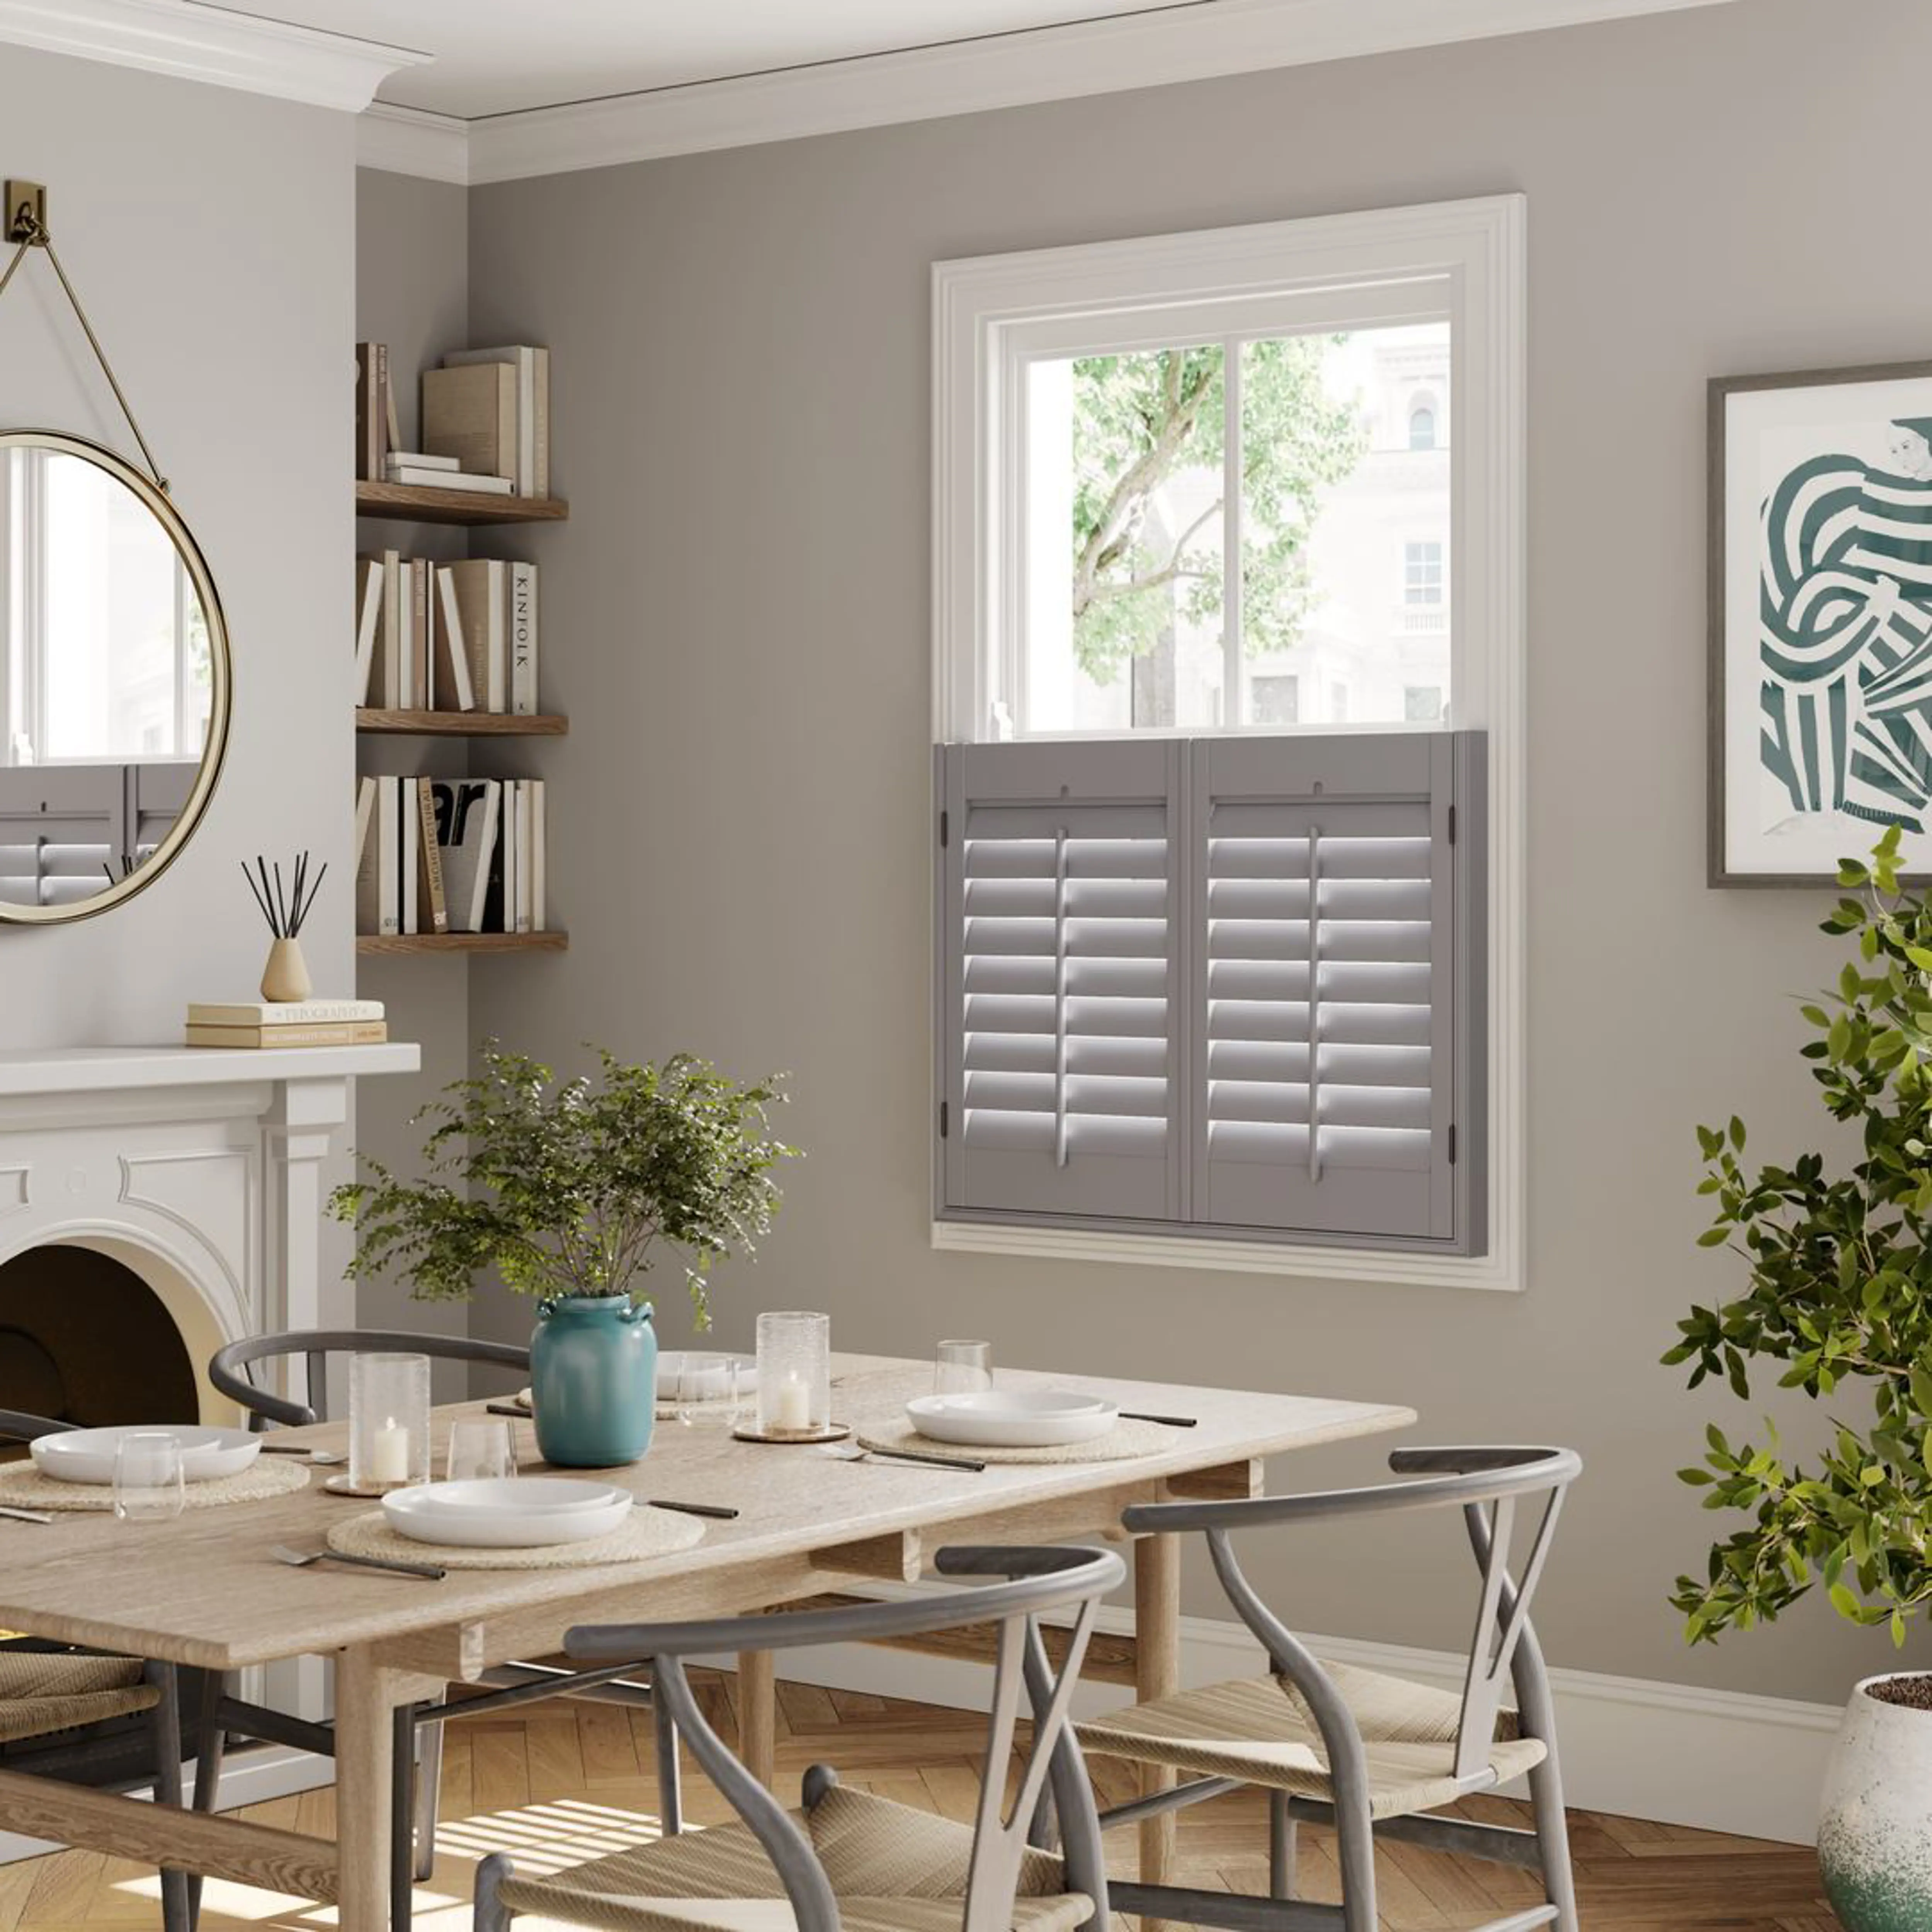 Signal Grey cafe style wooden shutters in dining room